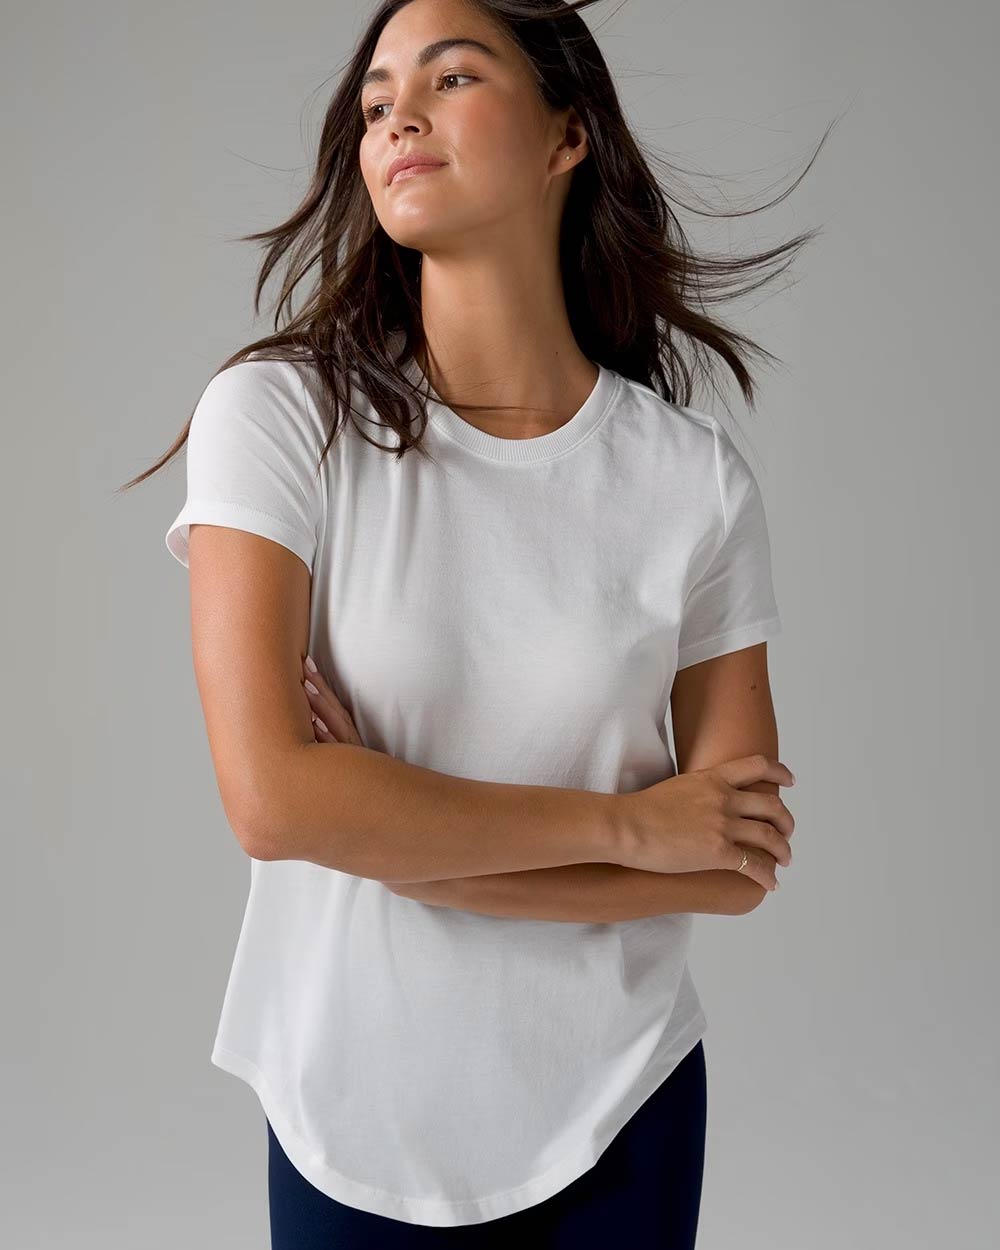 Soma<sup class=st-superscript>®</sup> women’s model wearing a white T-shirt and black pants.